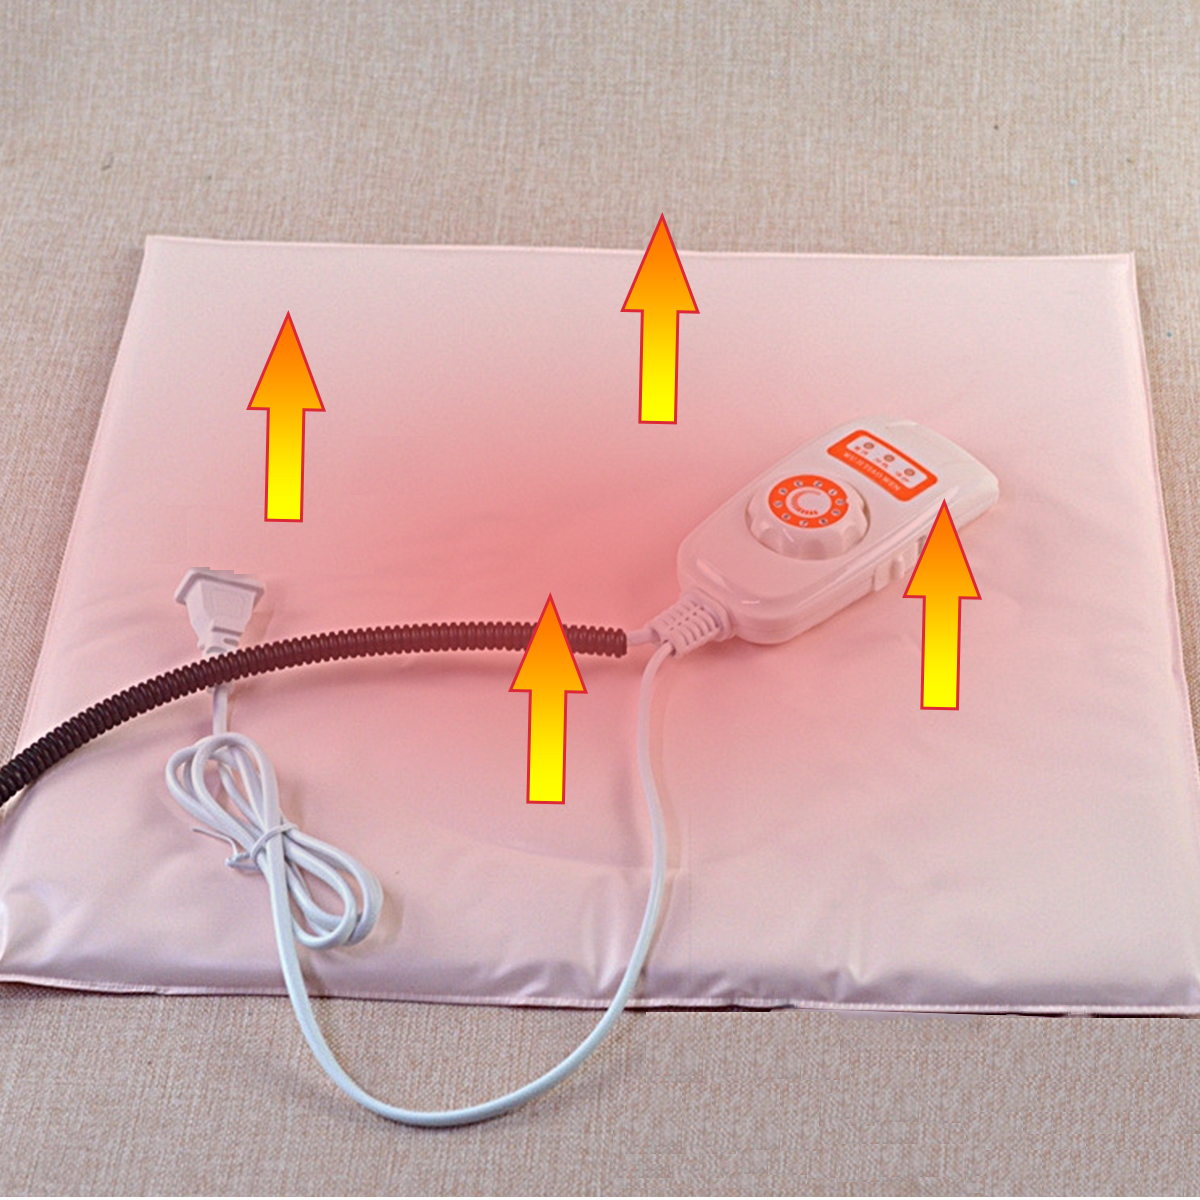 10-Stalls-Electric-Pet-Puppy-Pad-Heated-Blanket-Waterproof-Scratch-Prevention-Warmer-Heating-Mat-1407409-6